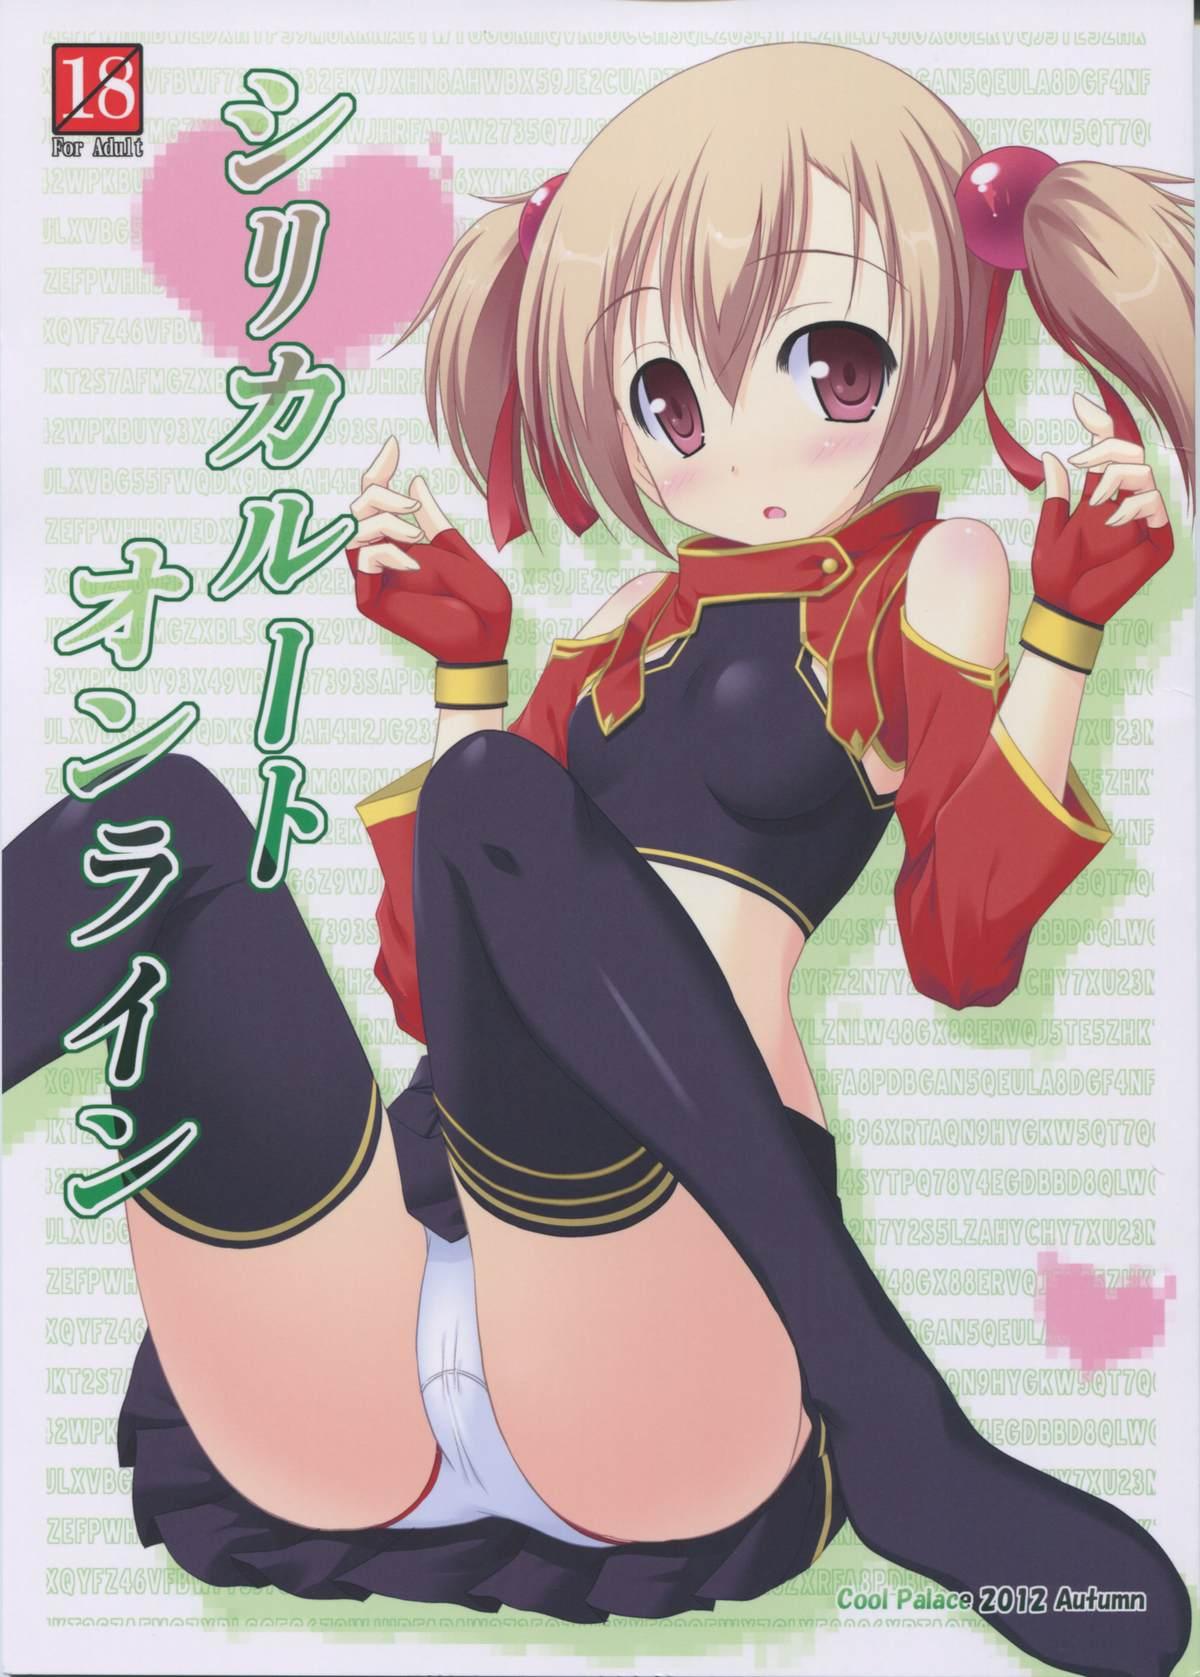 Play Silica Route Online - Sword art online Hardcoresex - Page 1